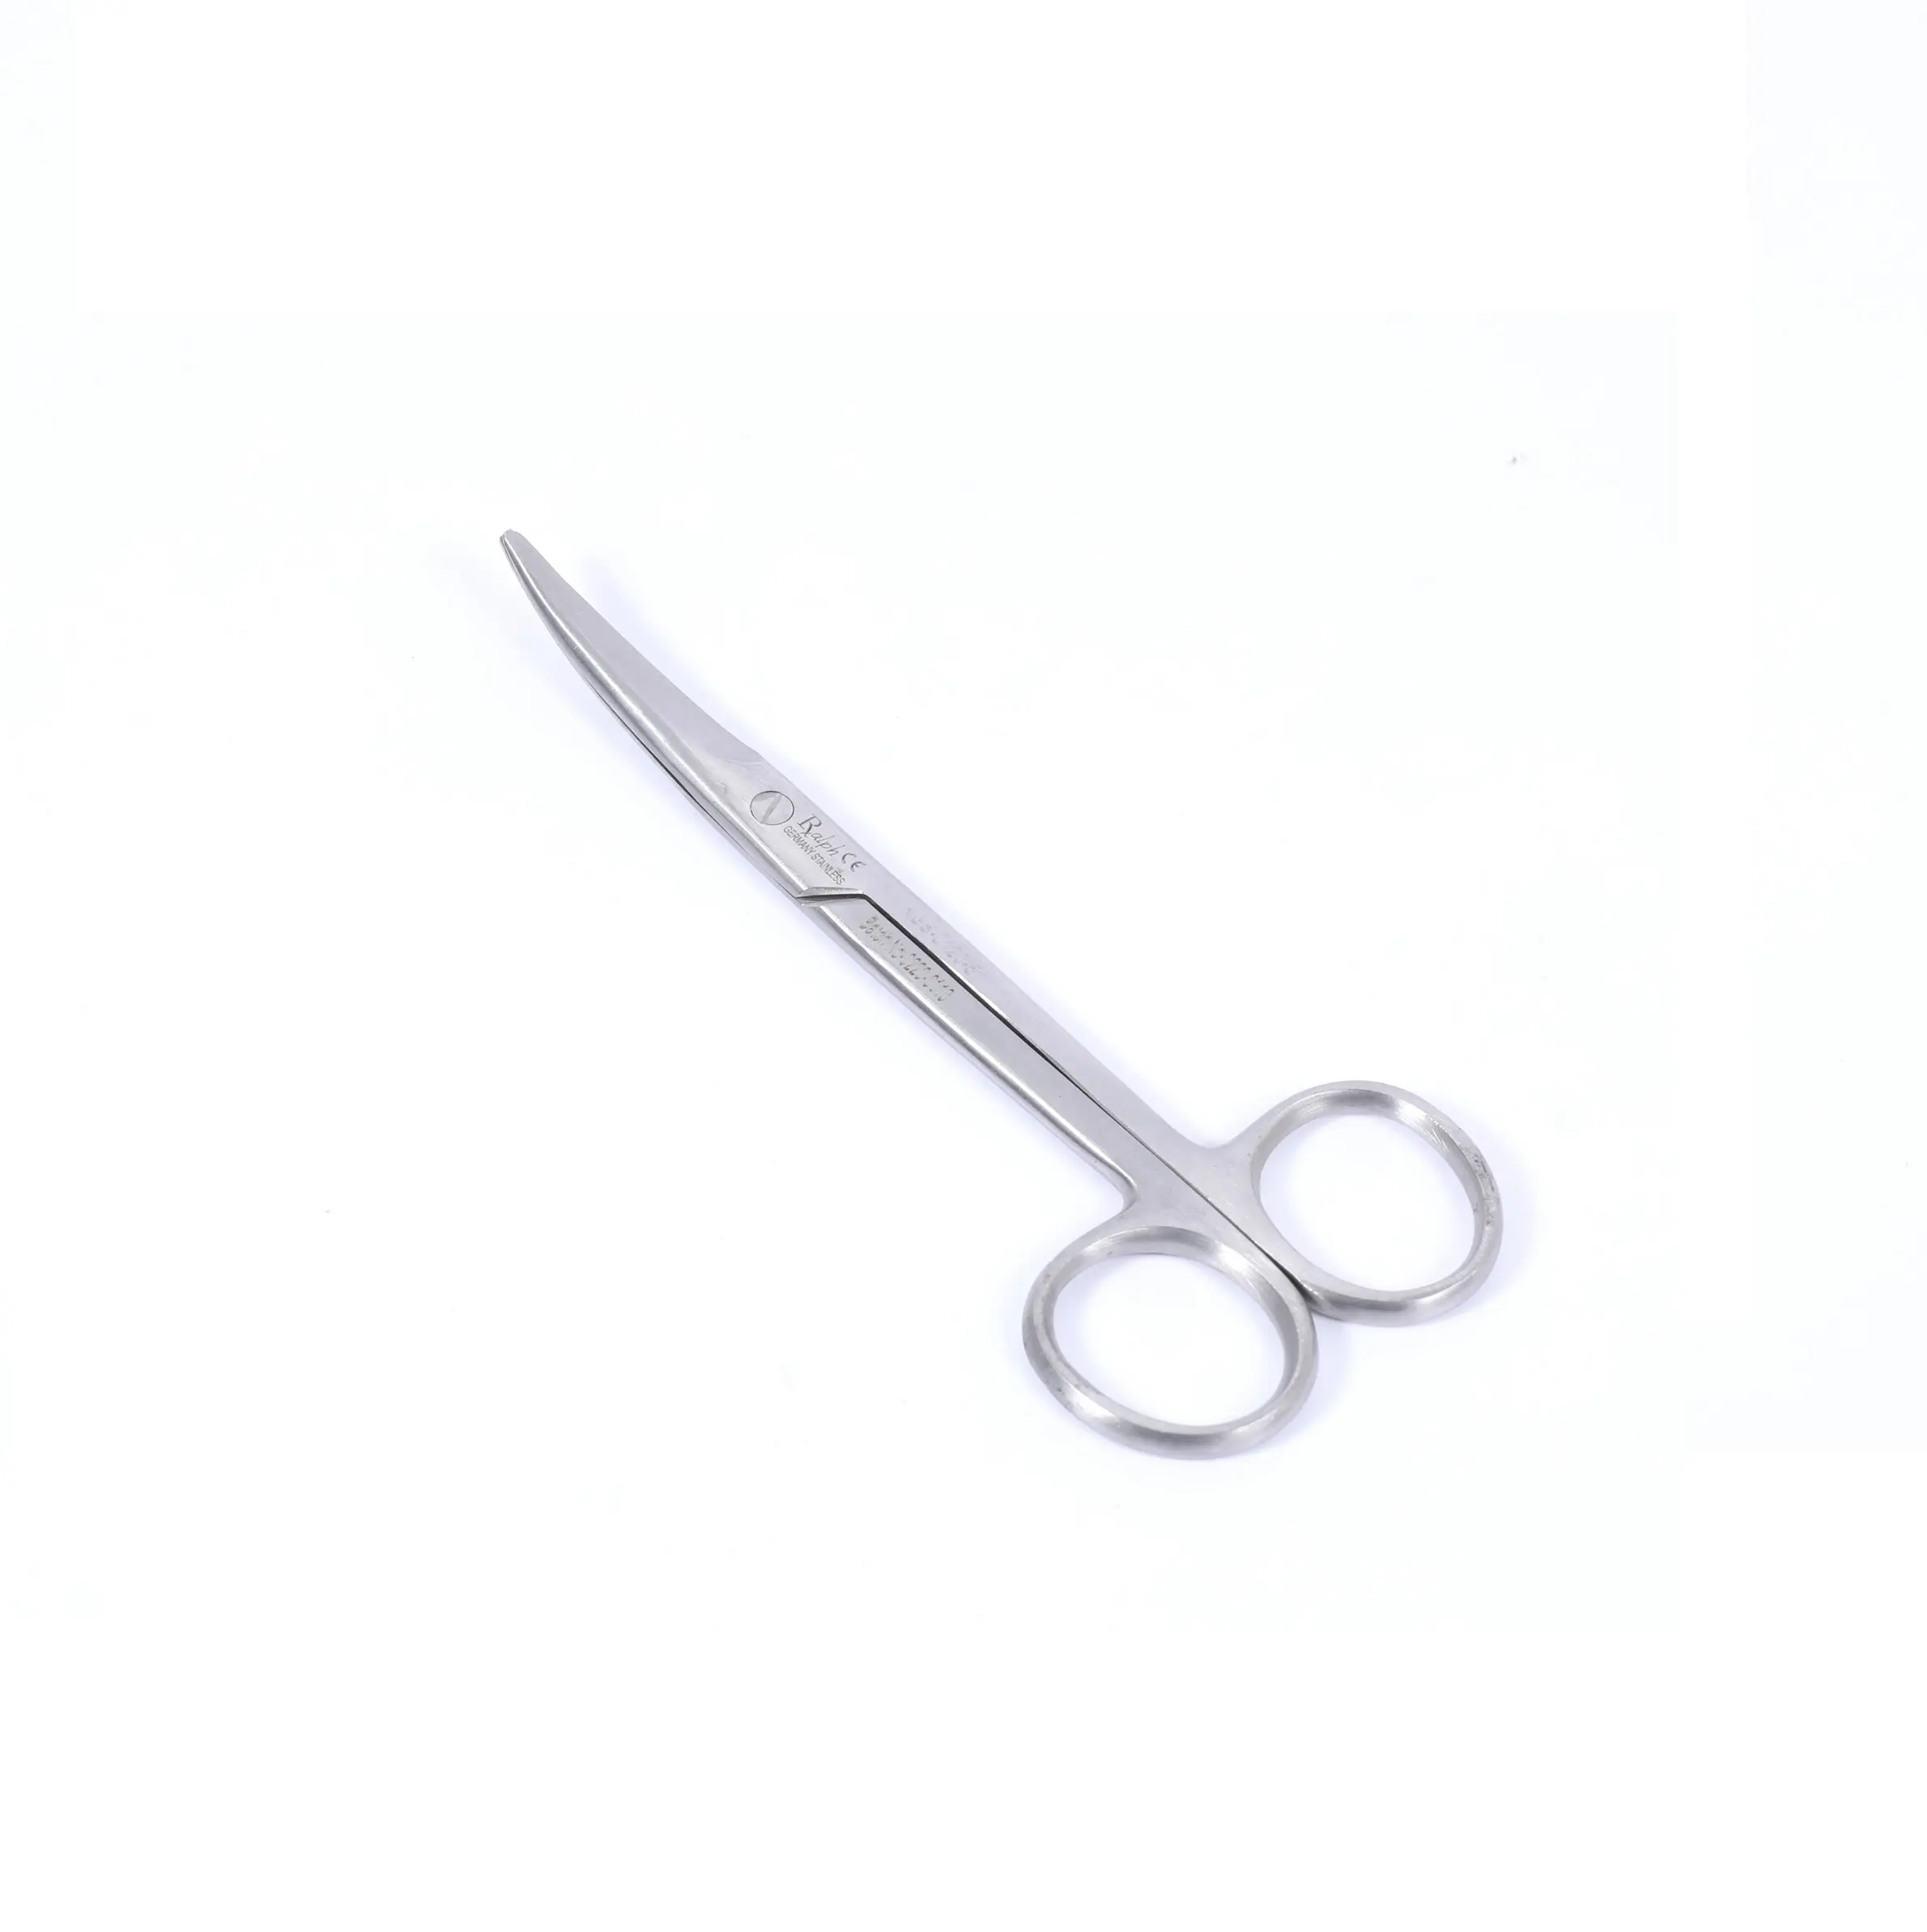 High Quality Different Size Medical Metzenbaum Scissors ST 5" From Indian Exporter And Manufacturer From India